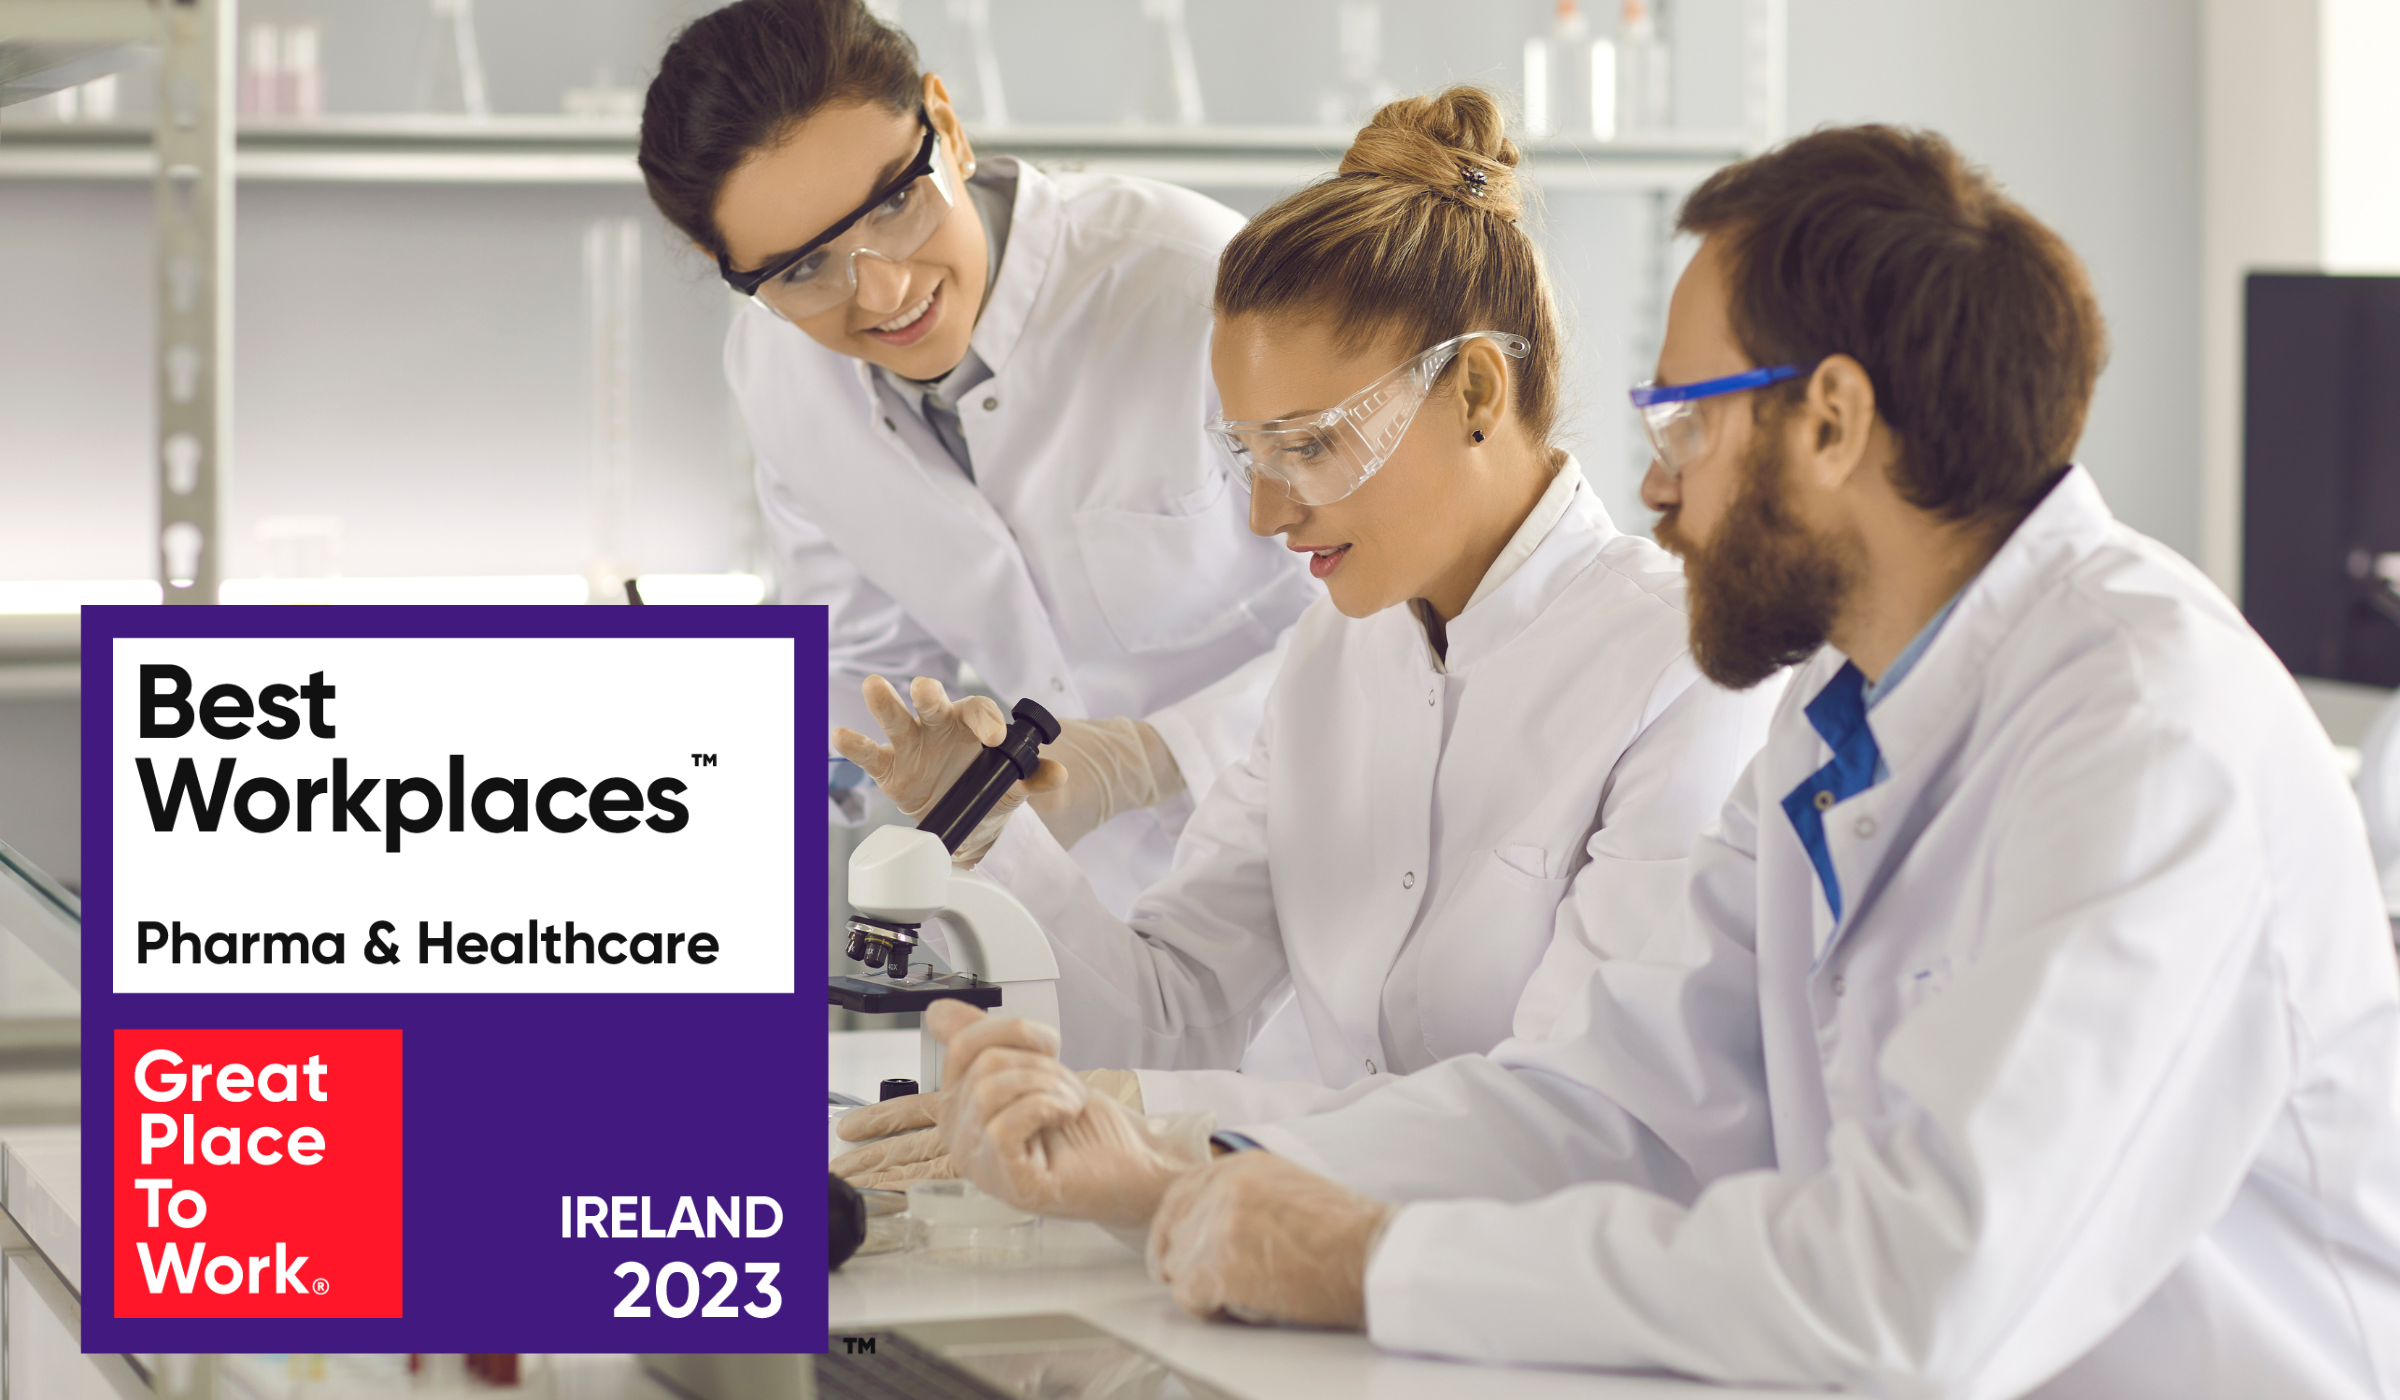 Revealed: The Best Workplaces™ in Pharma and Healthcare 2023